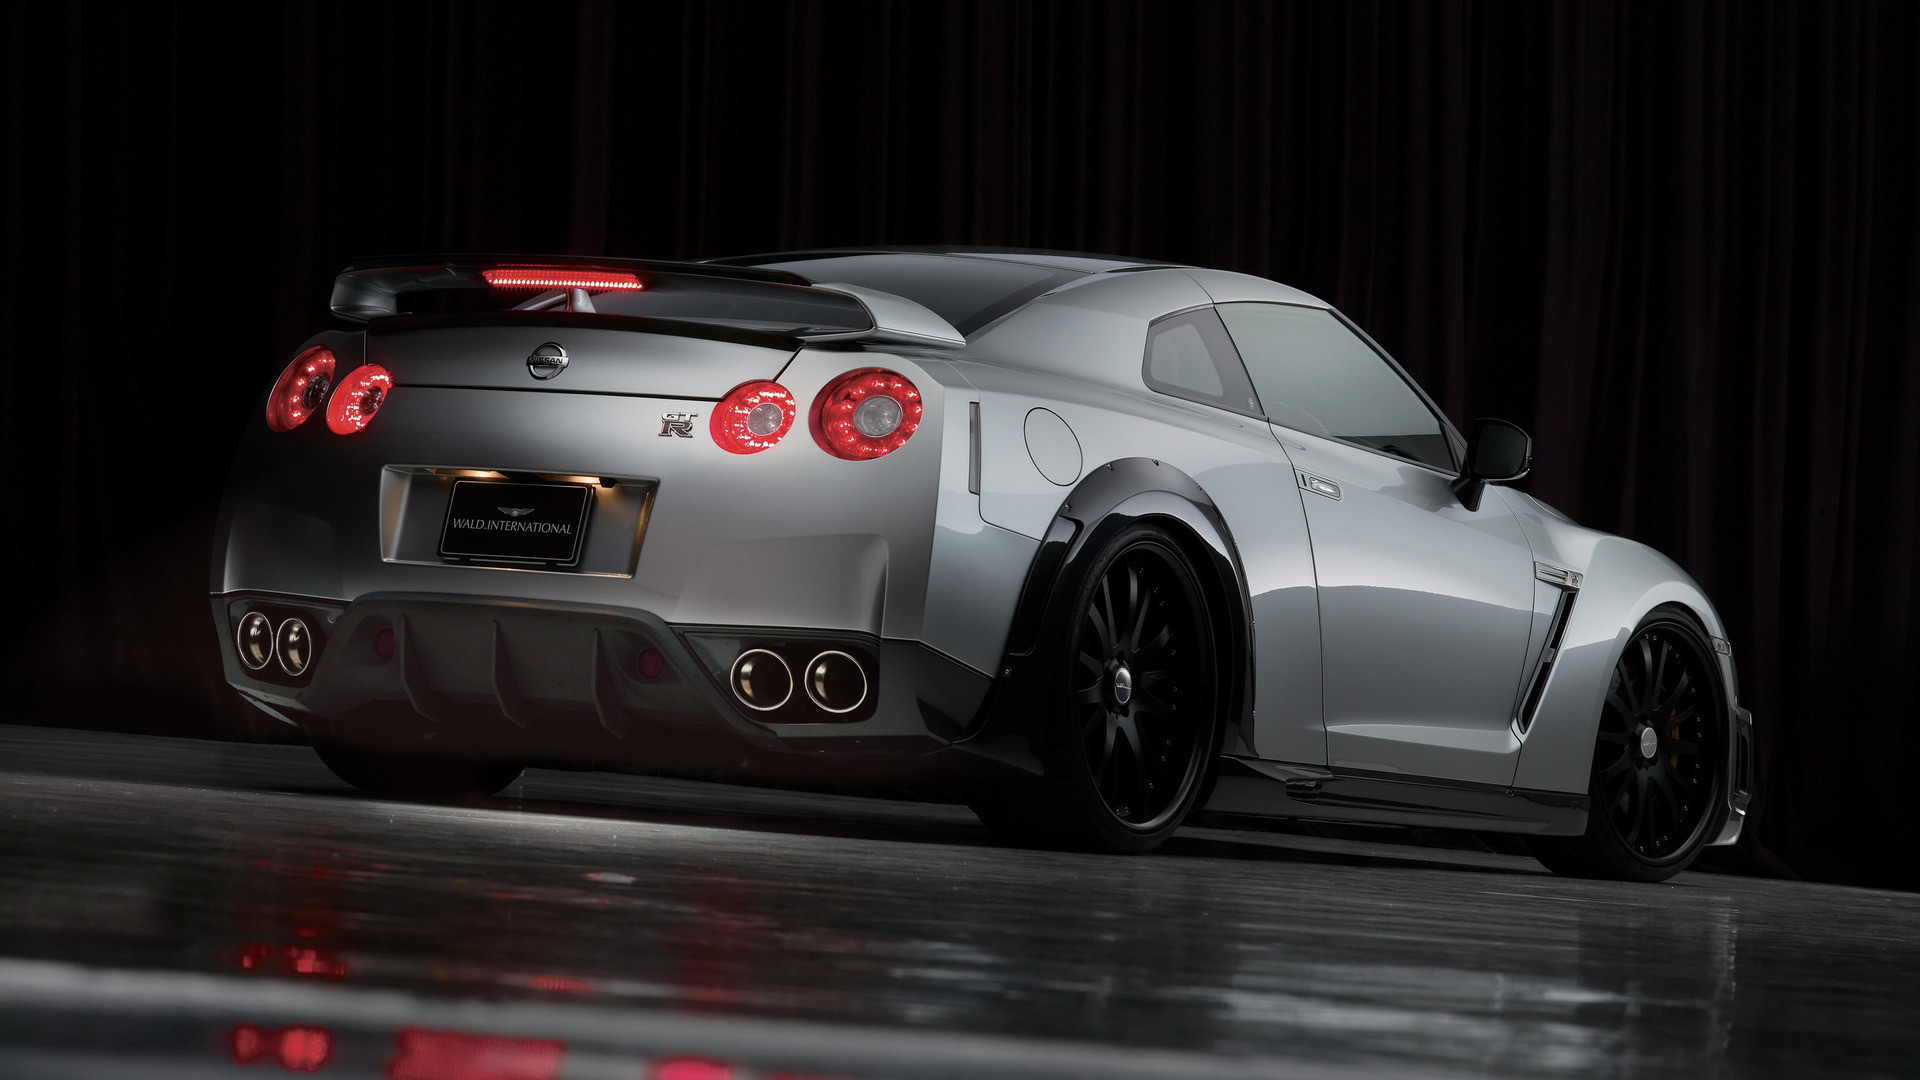 Awesome Nissan Car Pixels Full HD Wallpaper Pack – Tech Bug